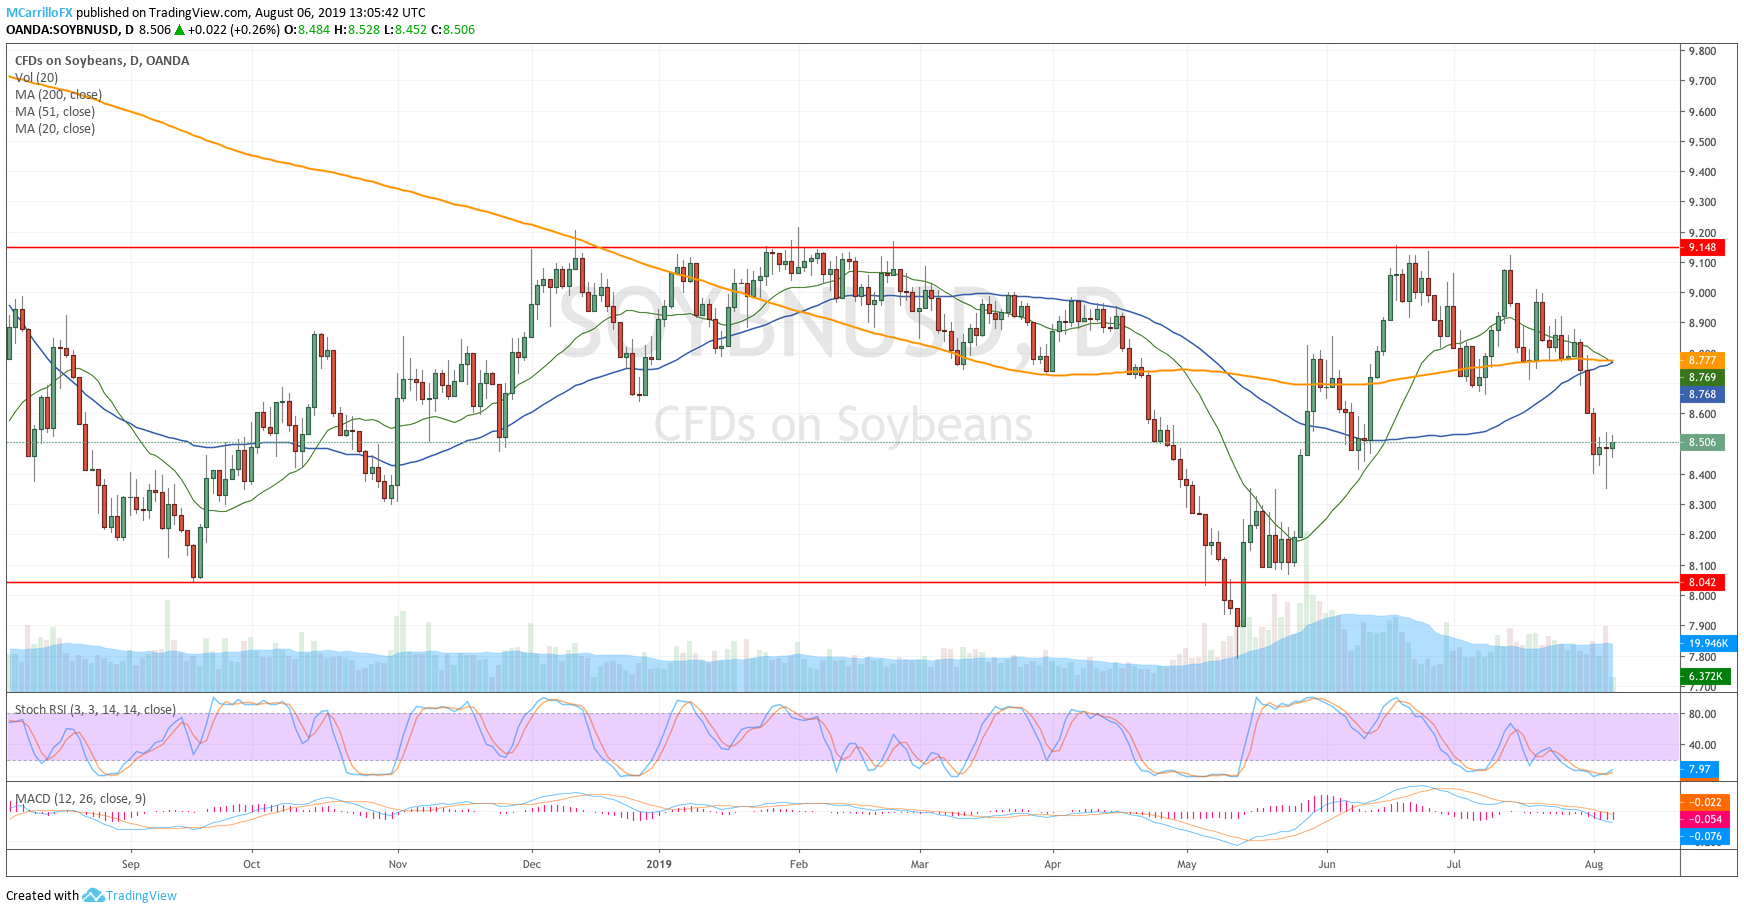 Price of Soybeans daily chart August 6